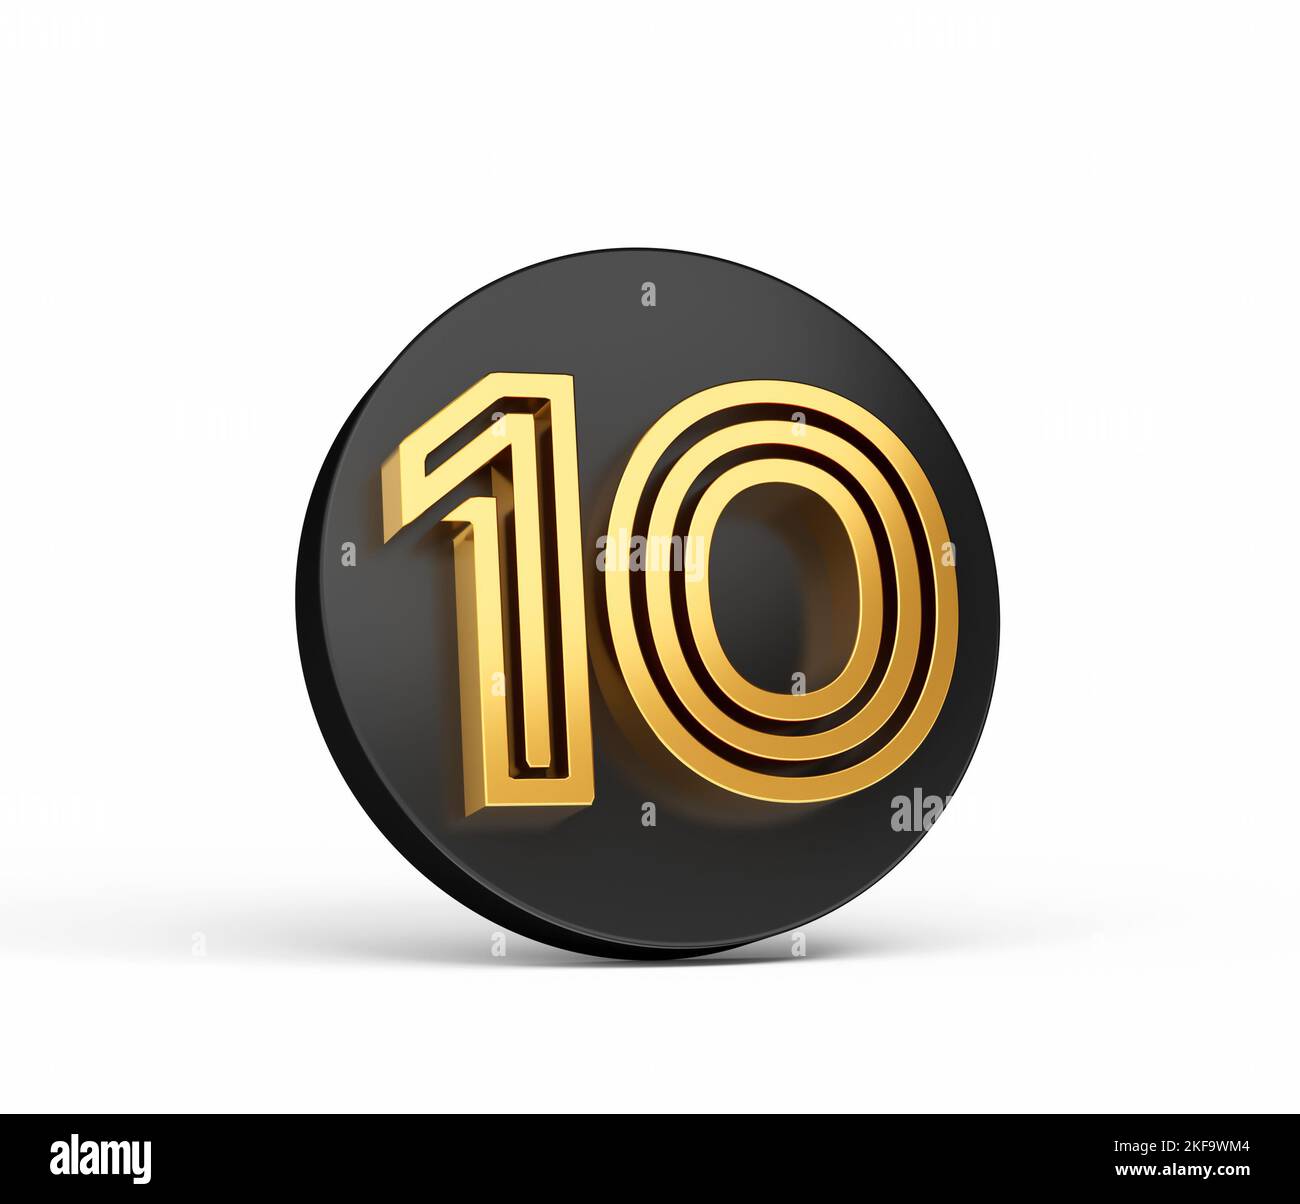 An elite 3D digit number 10 on a black circle isolated on a white